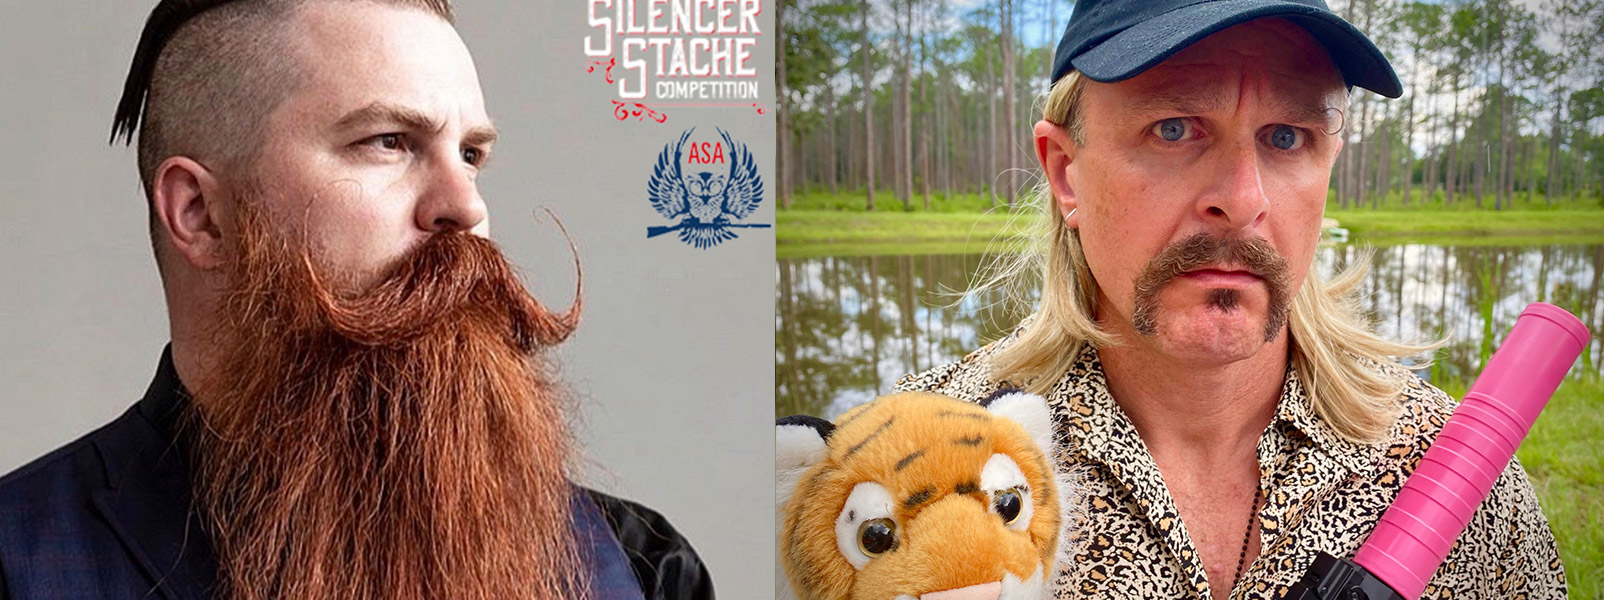 Read more about the article ASA’s Silencer Stache Competition (Week 6)